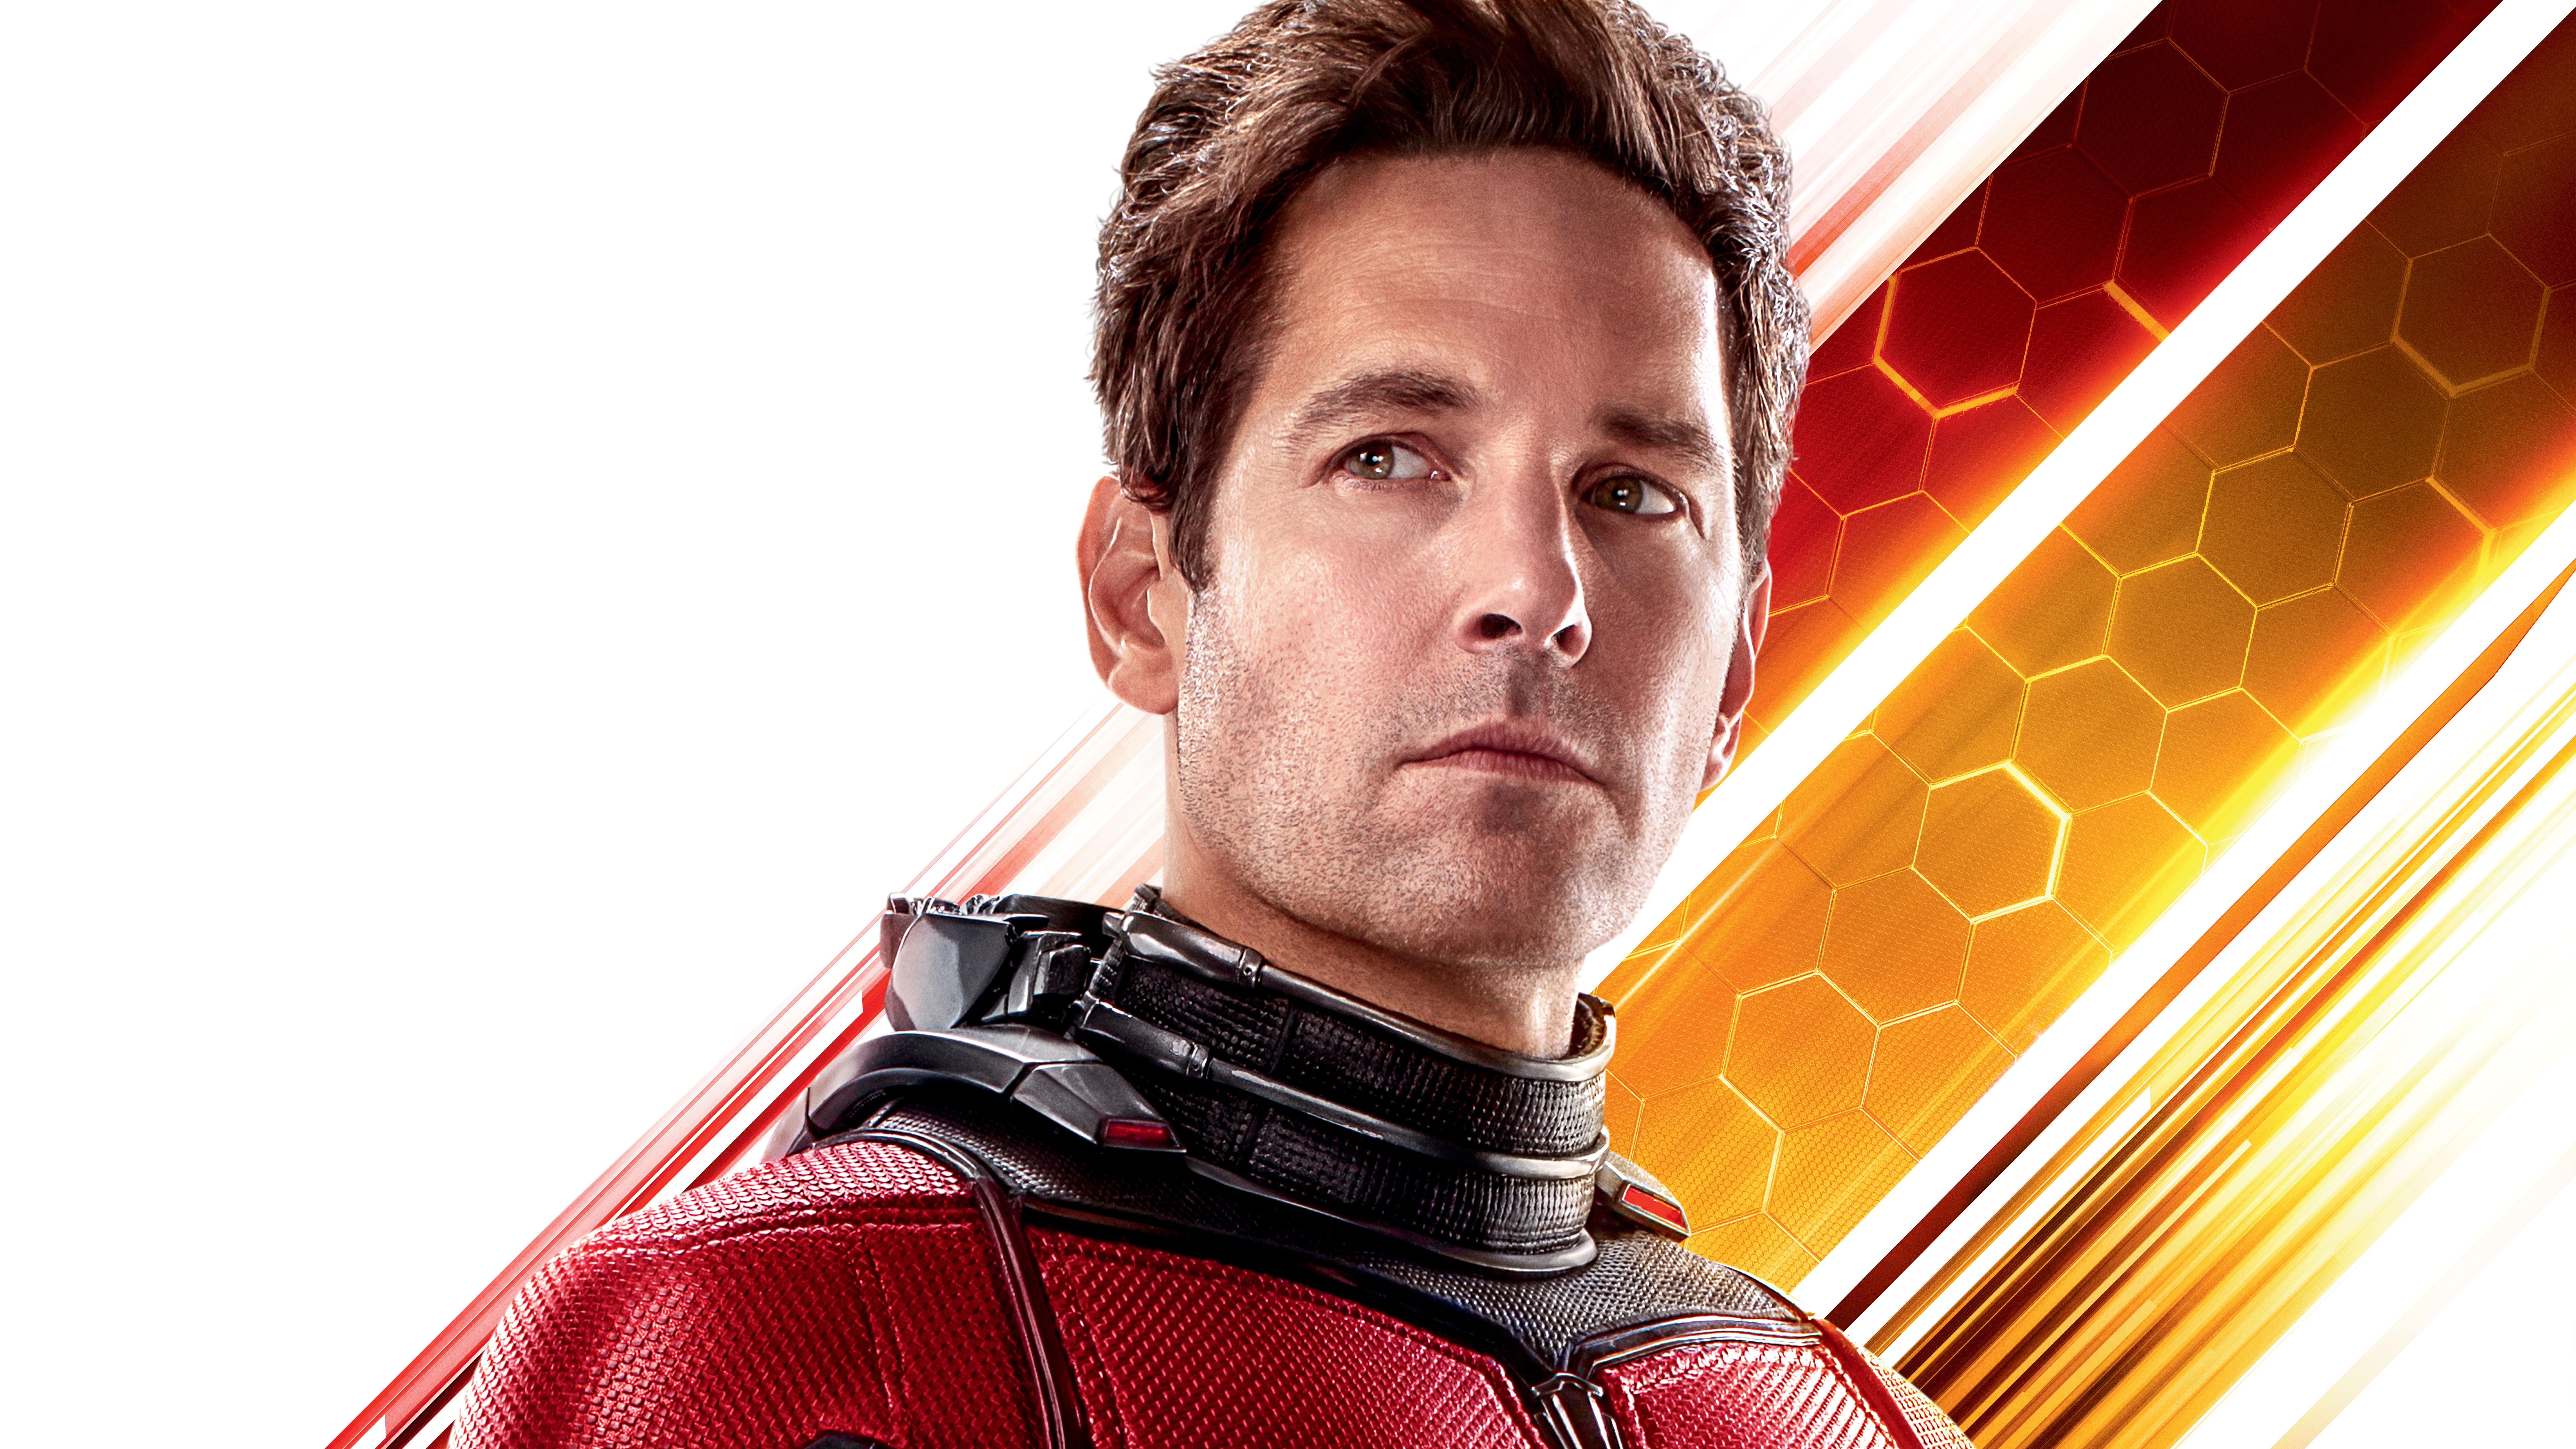 HD wallpaper, 8K Wallpapers, 2018 Movies Wallpapers, Ant Man Wallpapers, Movies Wallpapers, Hd Wallpapers, 10K Wallpapers, 5K Wallpapers, Paul Rudd As Antman In Ant Man And The Wasp 10K, 4K Wallpapers, Ant Man And The Wasp Wallpapers